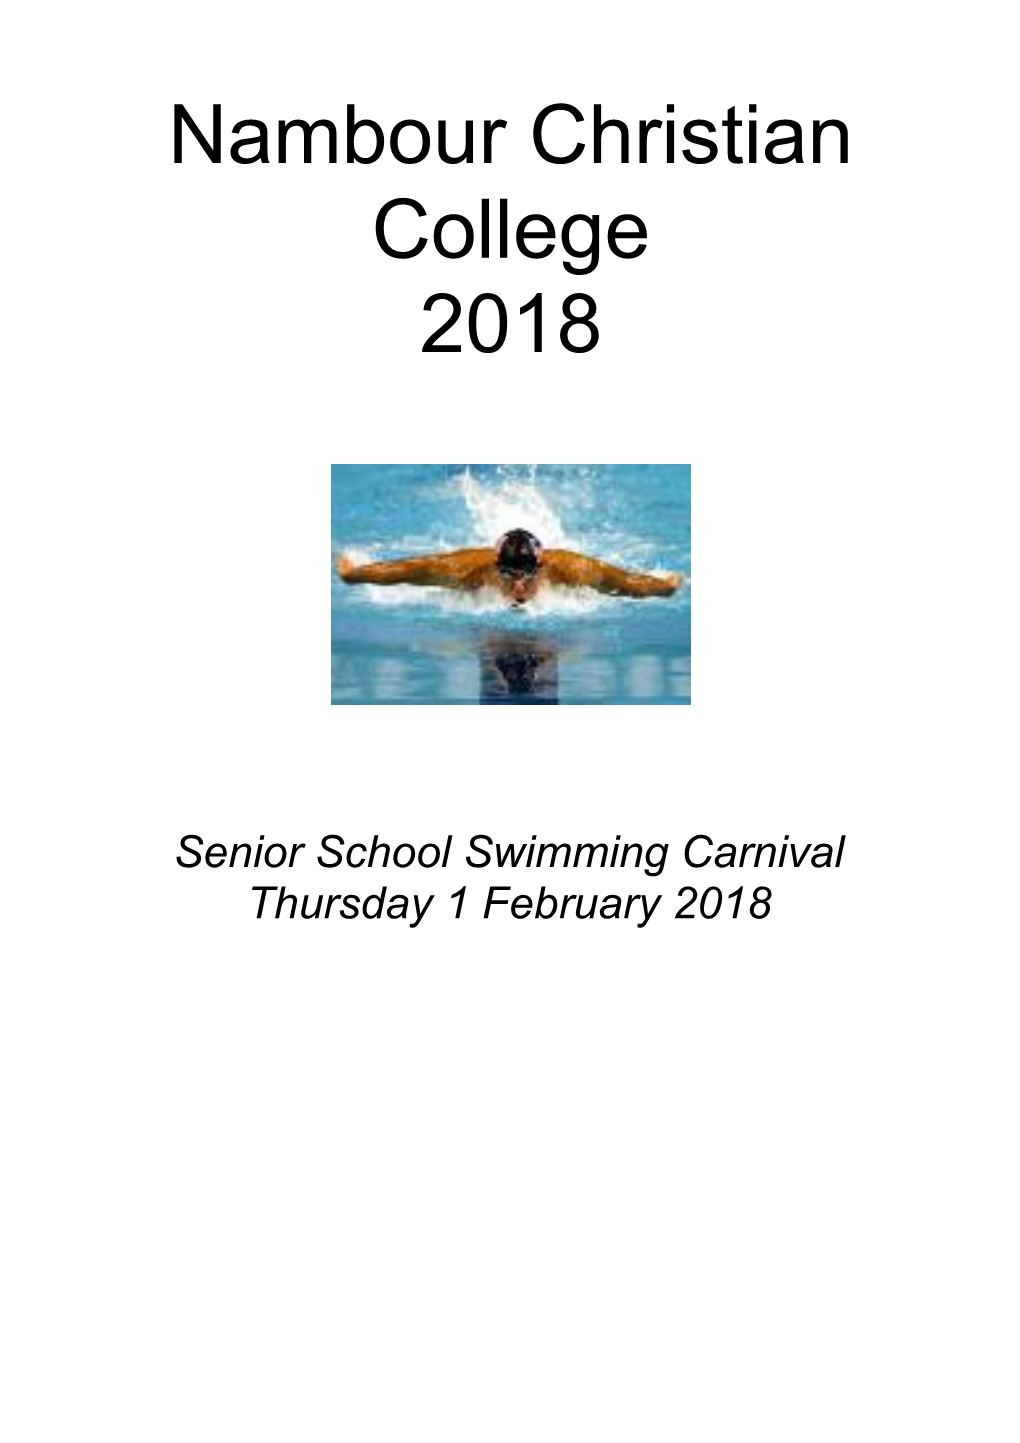 Point Structure for Swimming Carnival